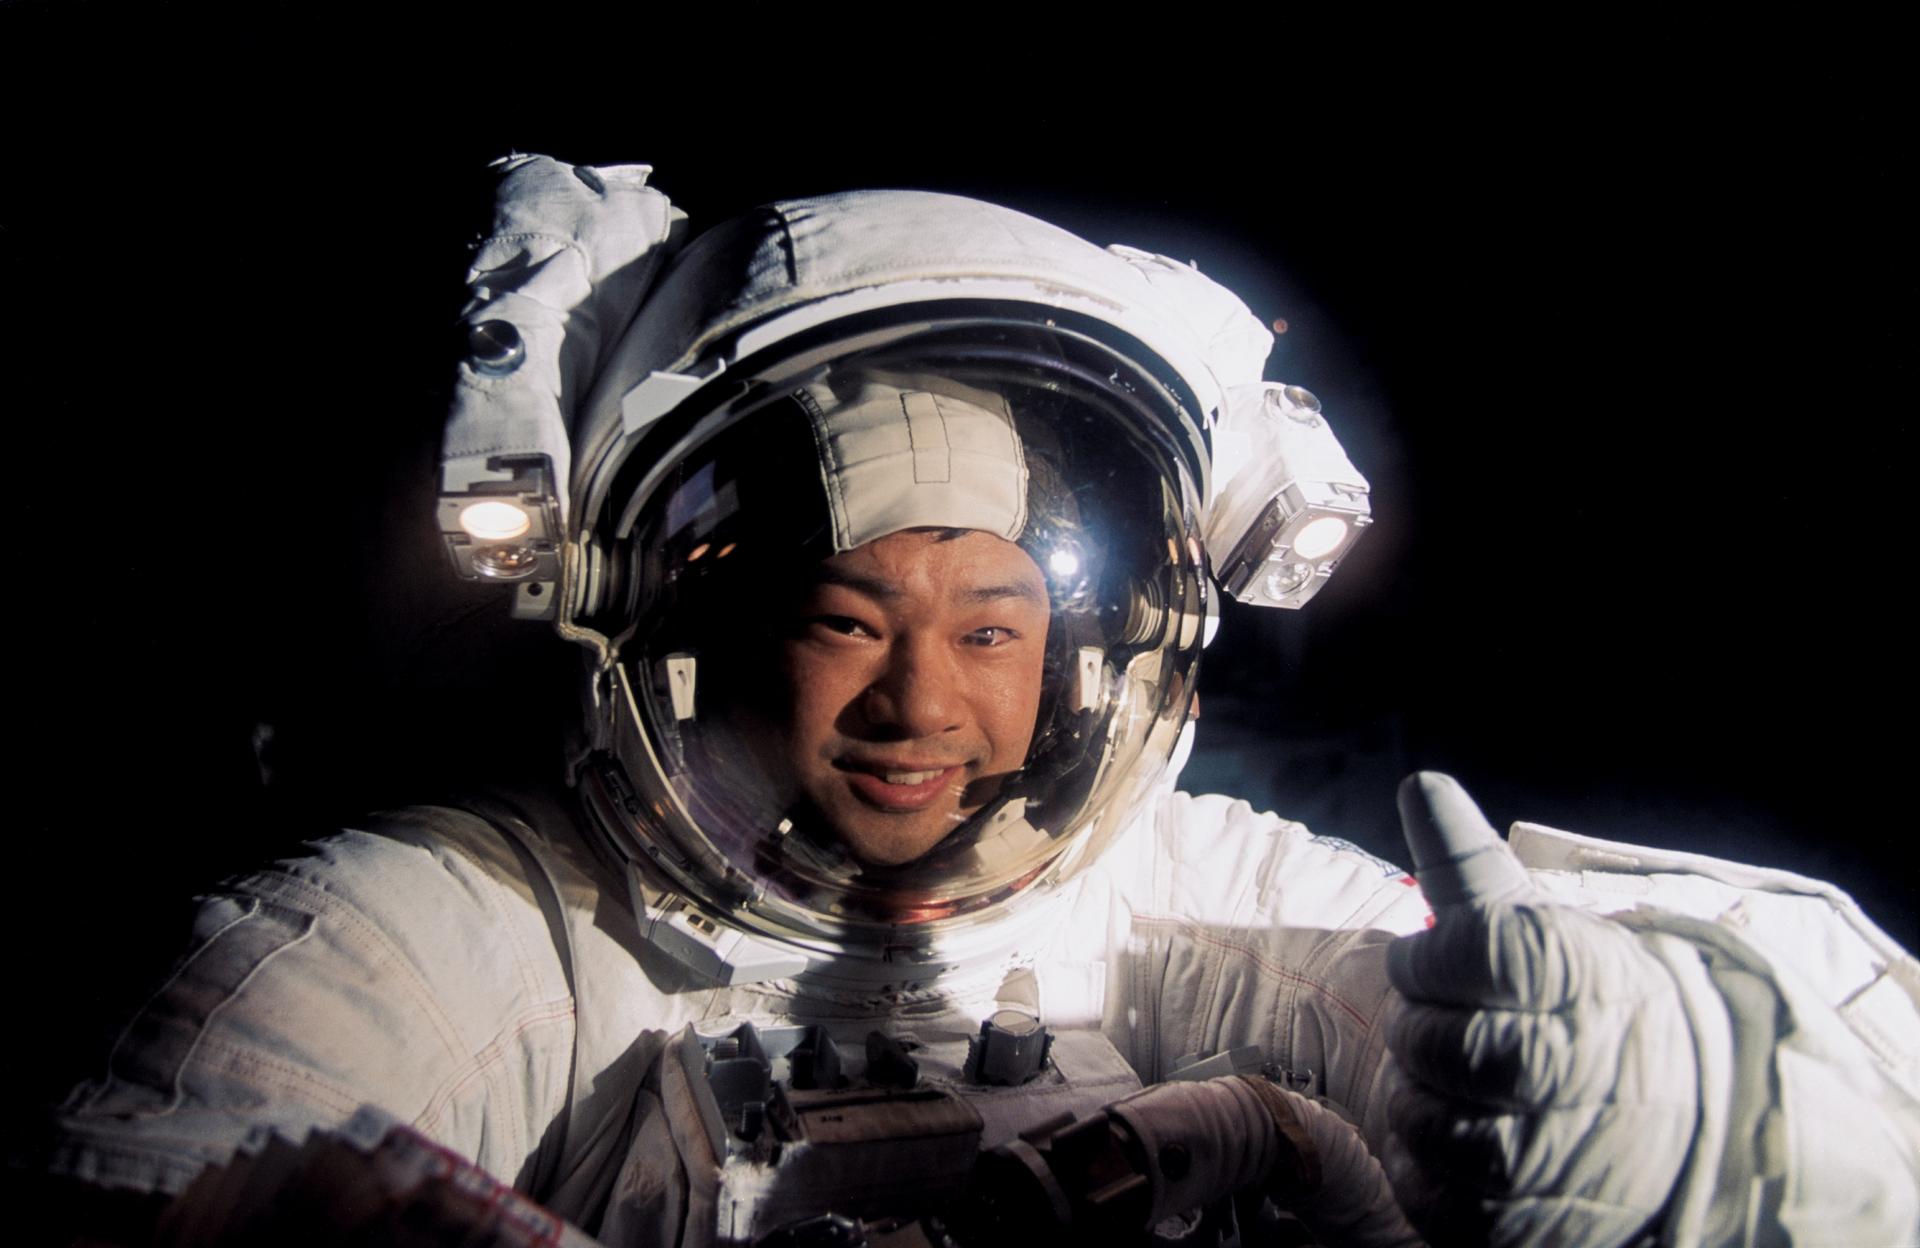 leroy chiao in a spacesuit giving a thumbs up